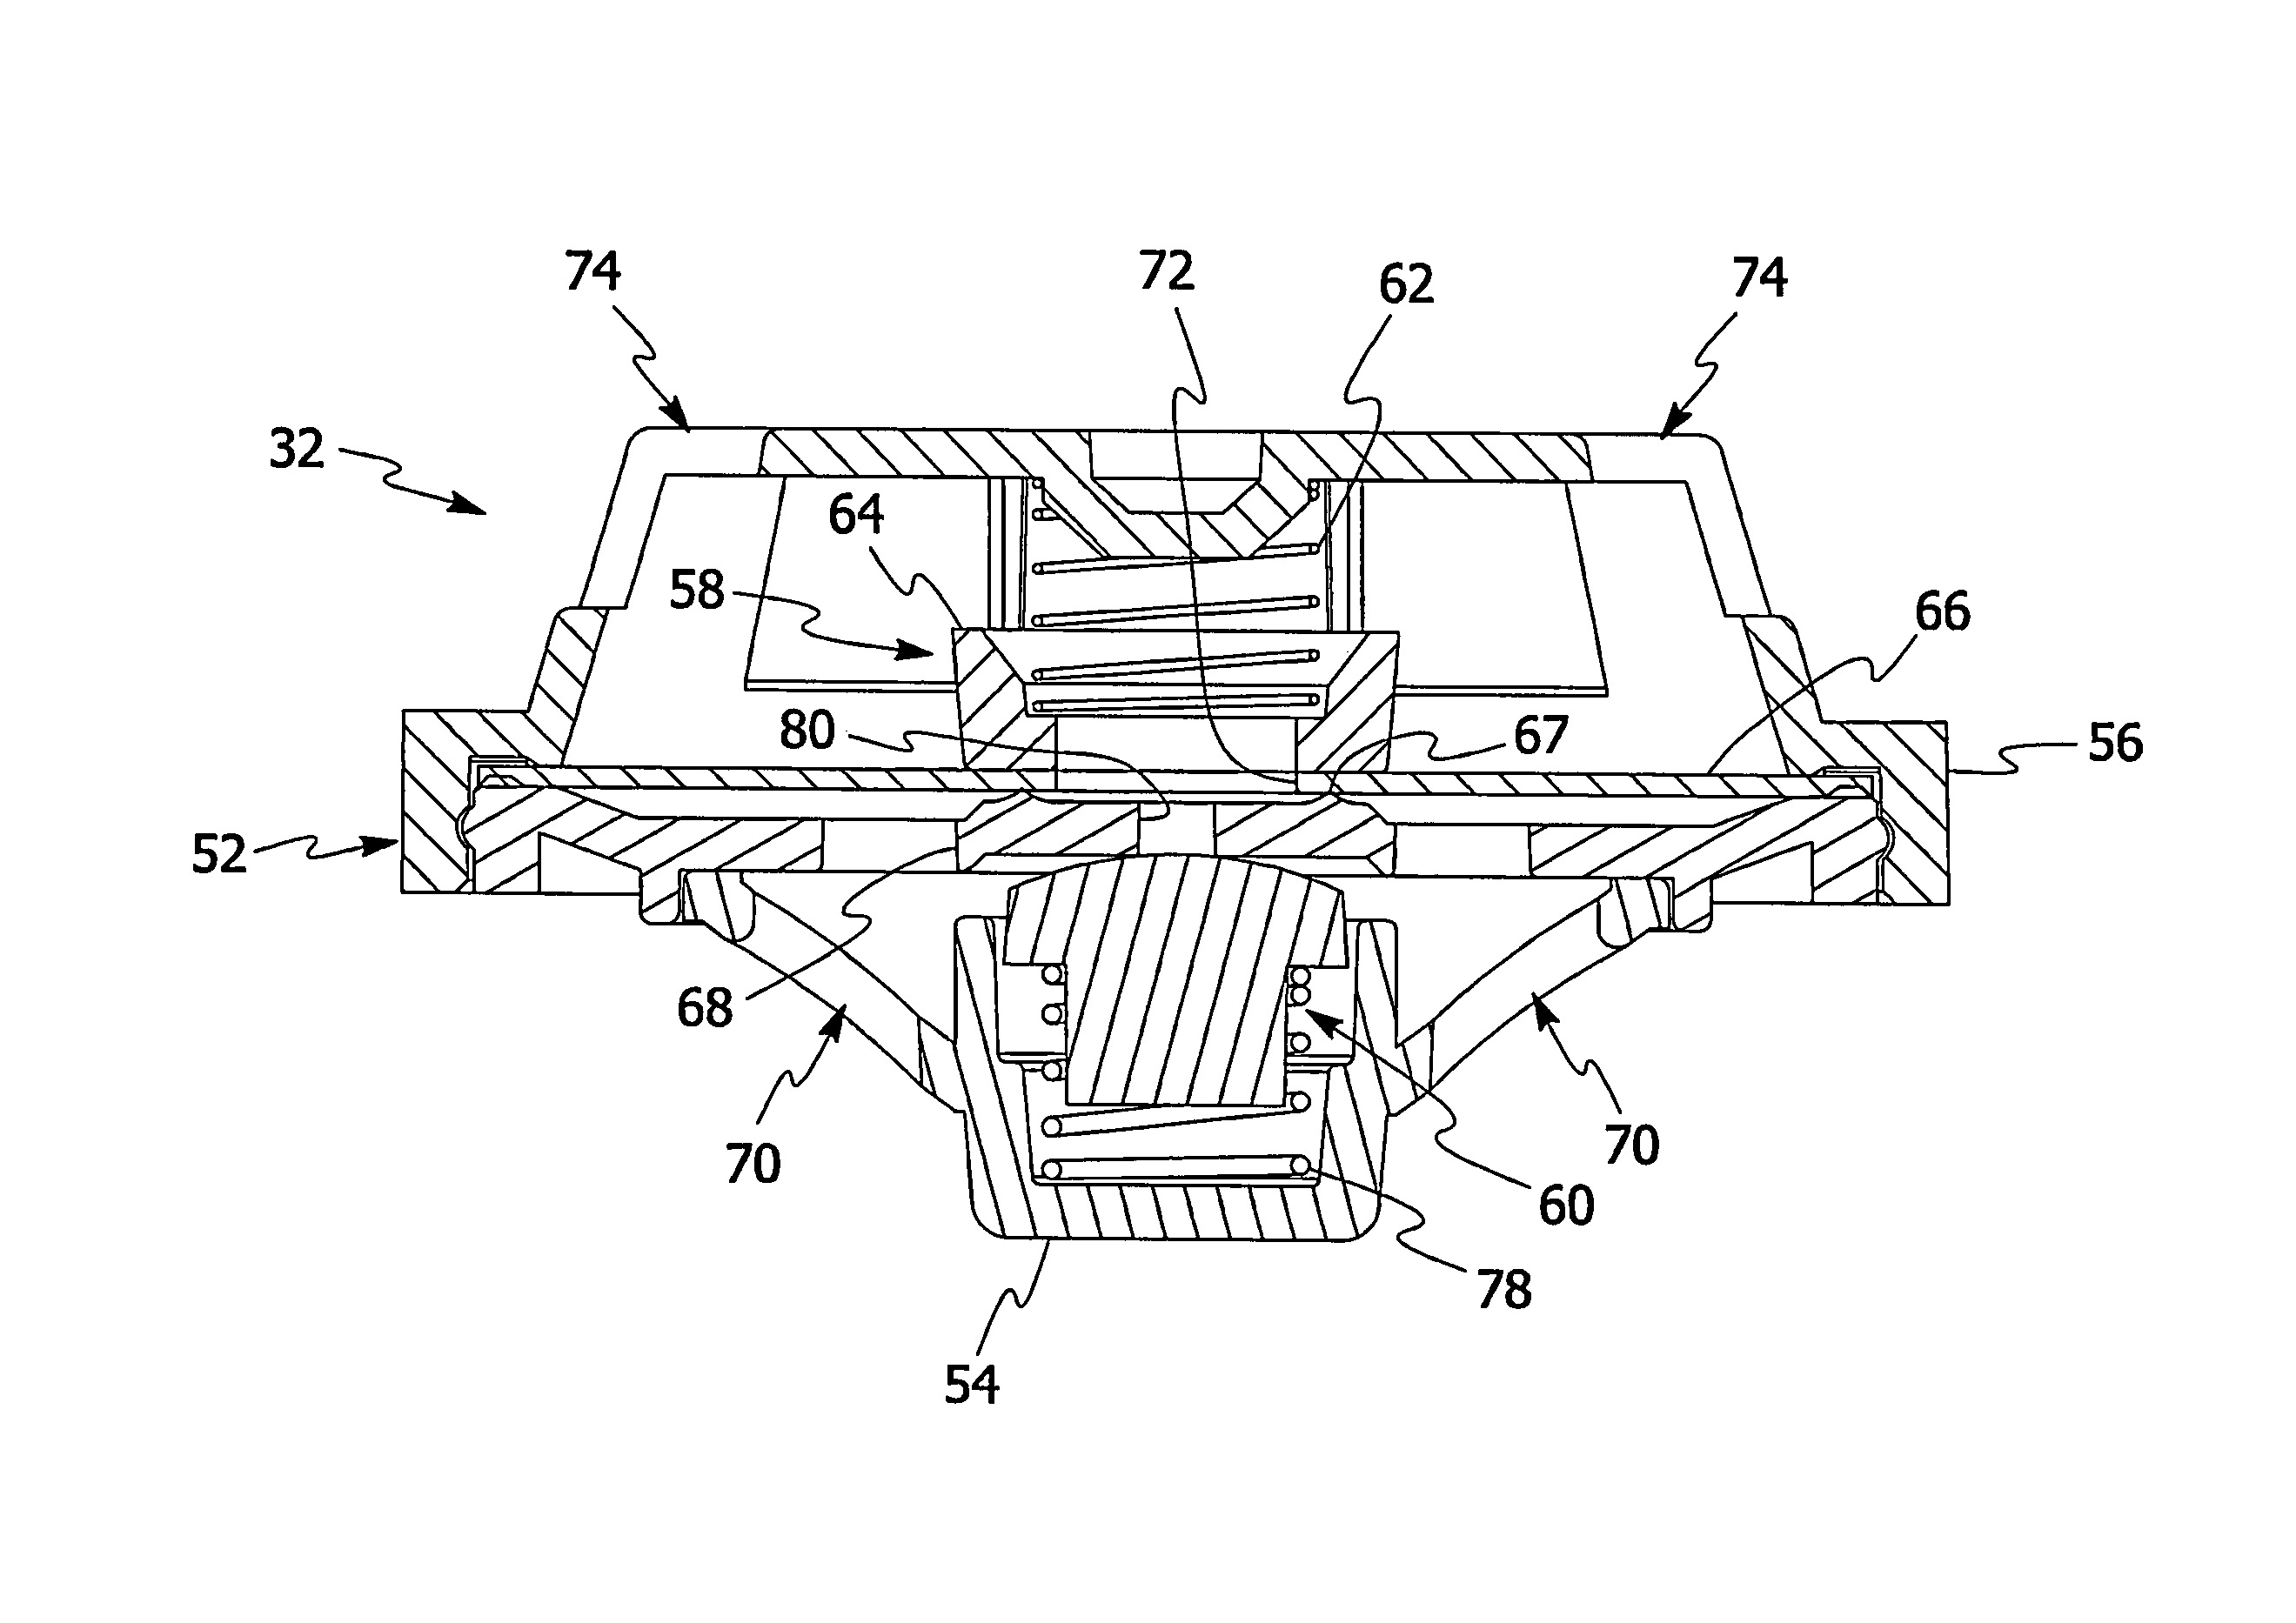 Apparatus for dispensing a liquid from a liquid storage container